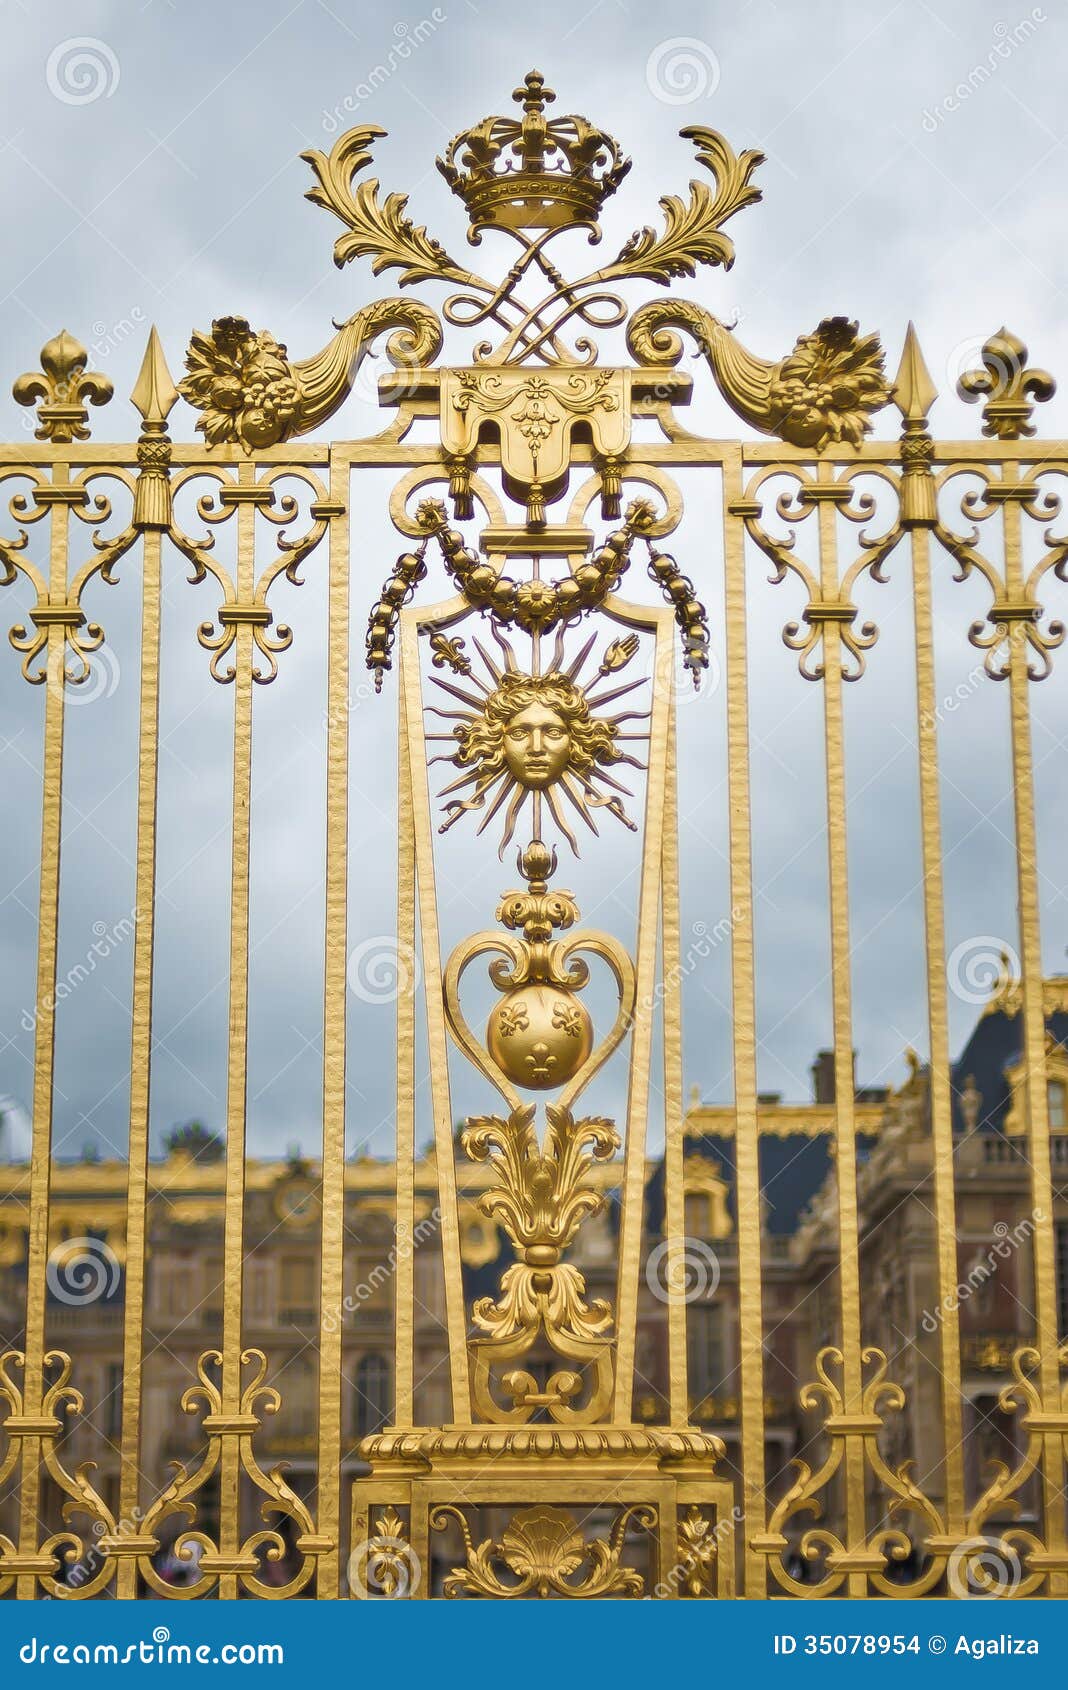 Versaille Palace Golden Fence Featuring The Sun King Stock Images - Image: 35078954